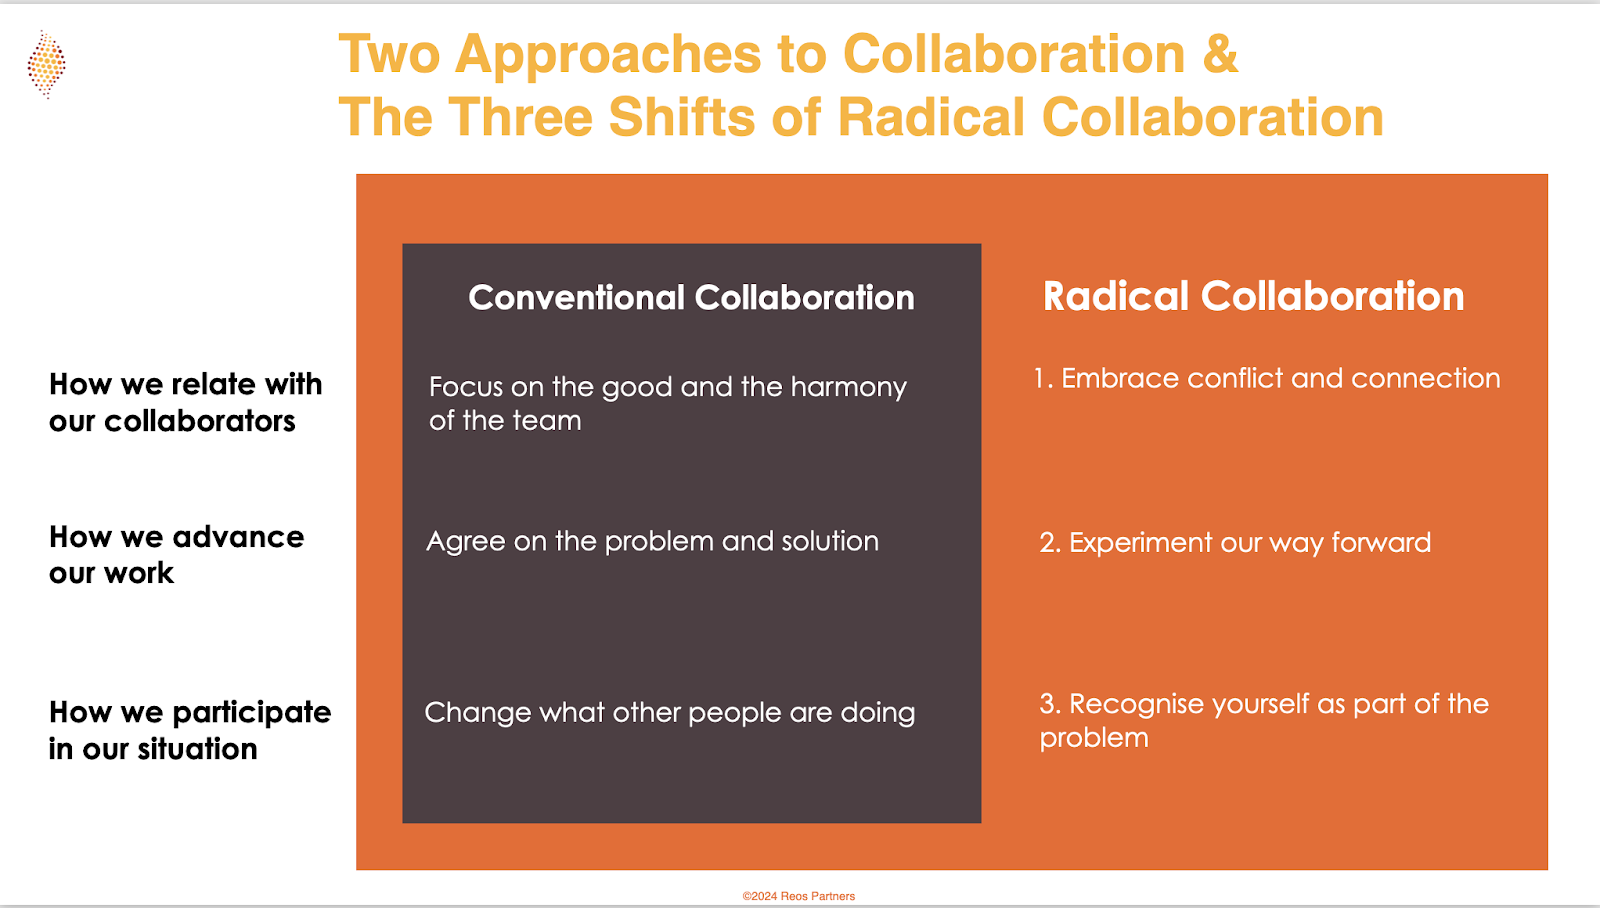 Approaches to radical collaboration